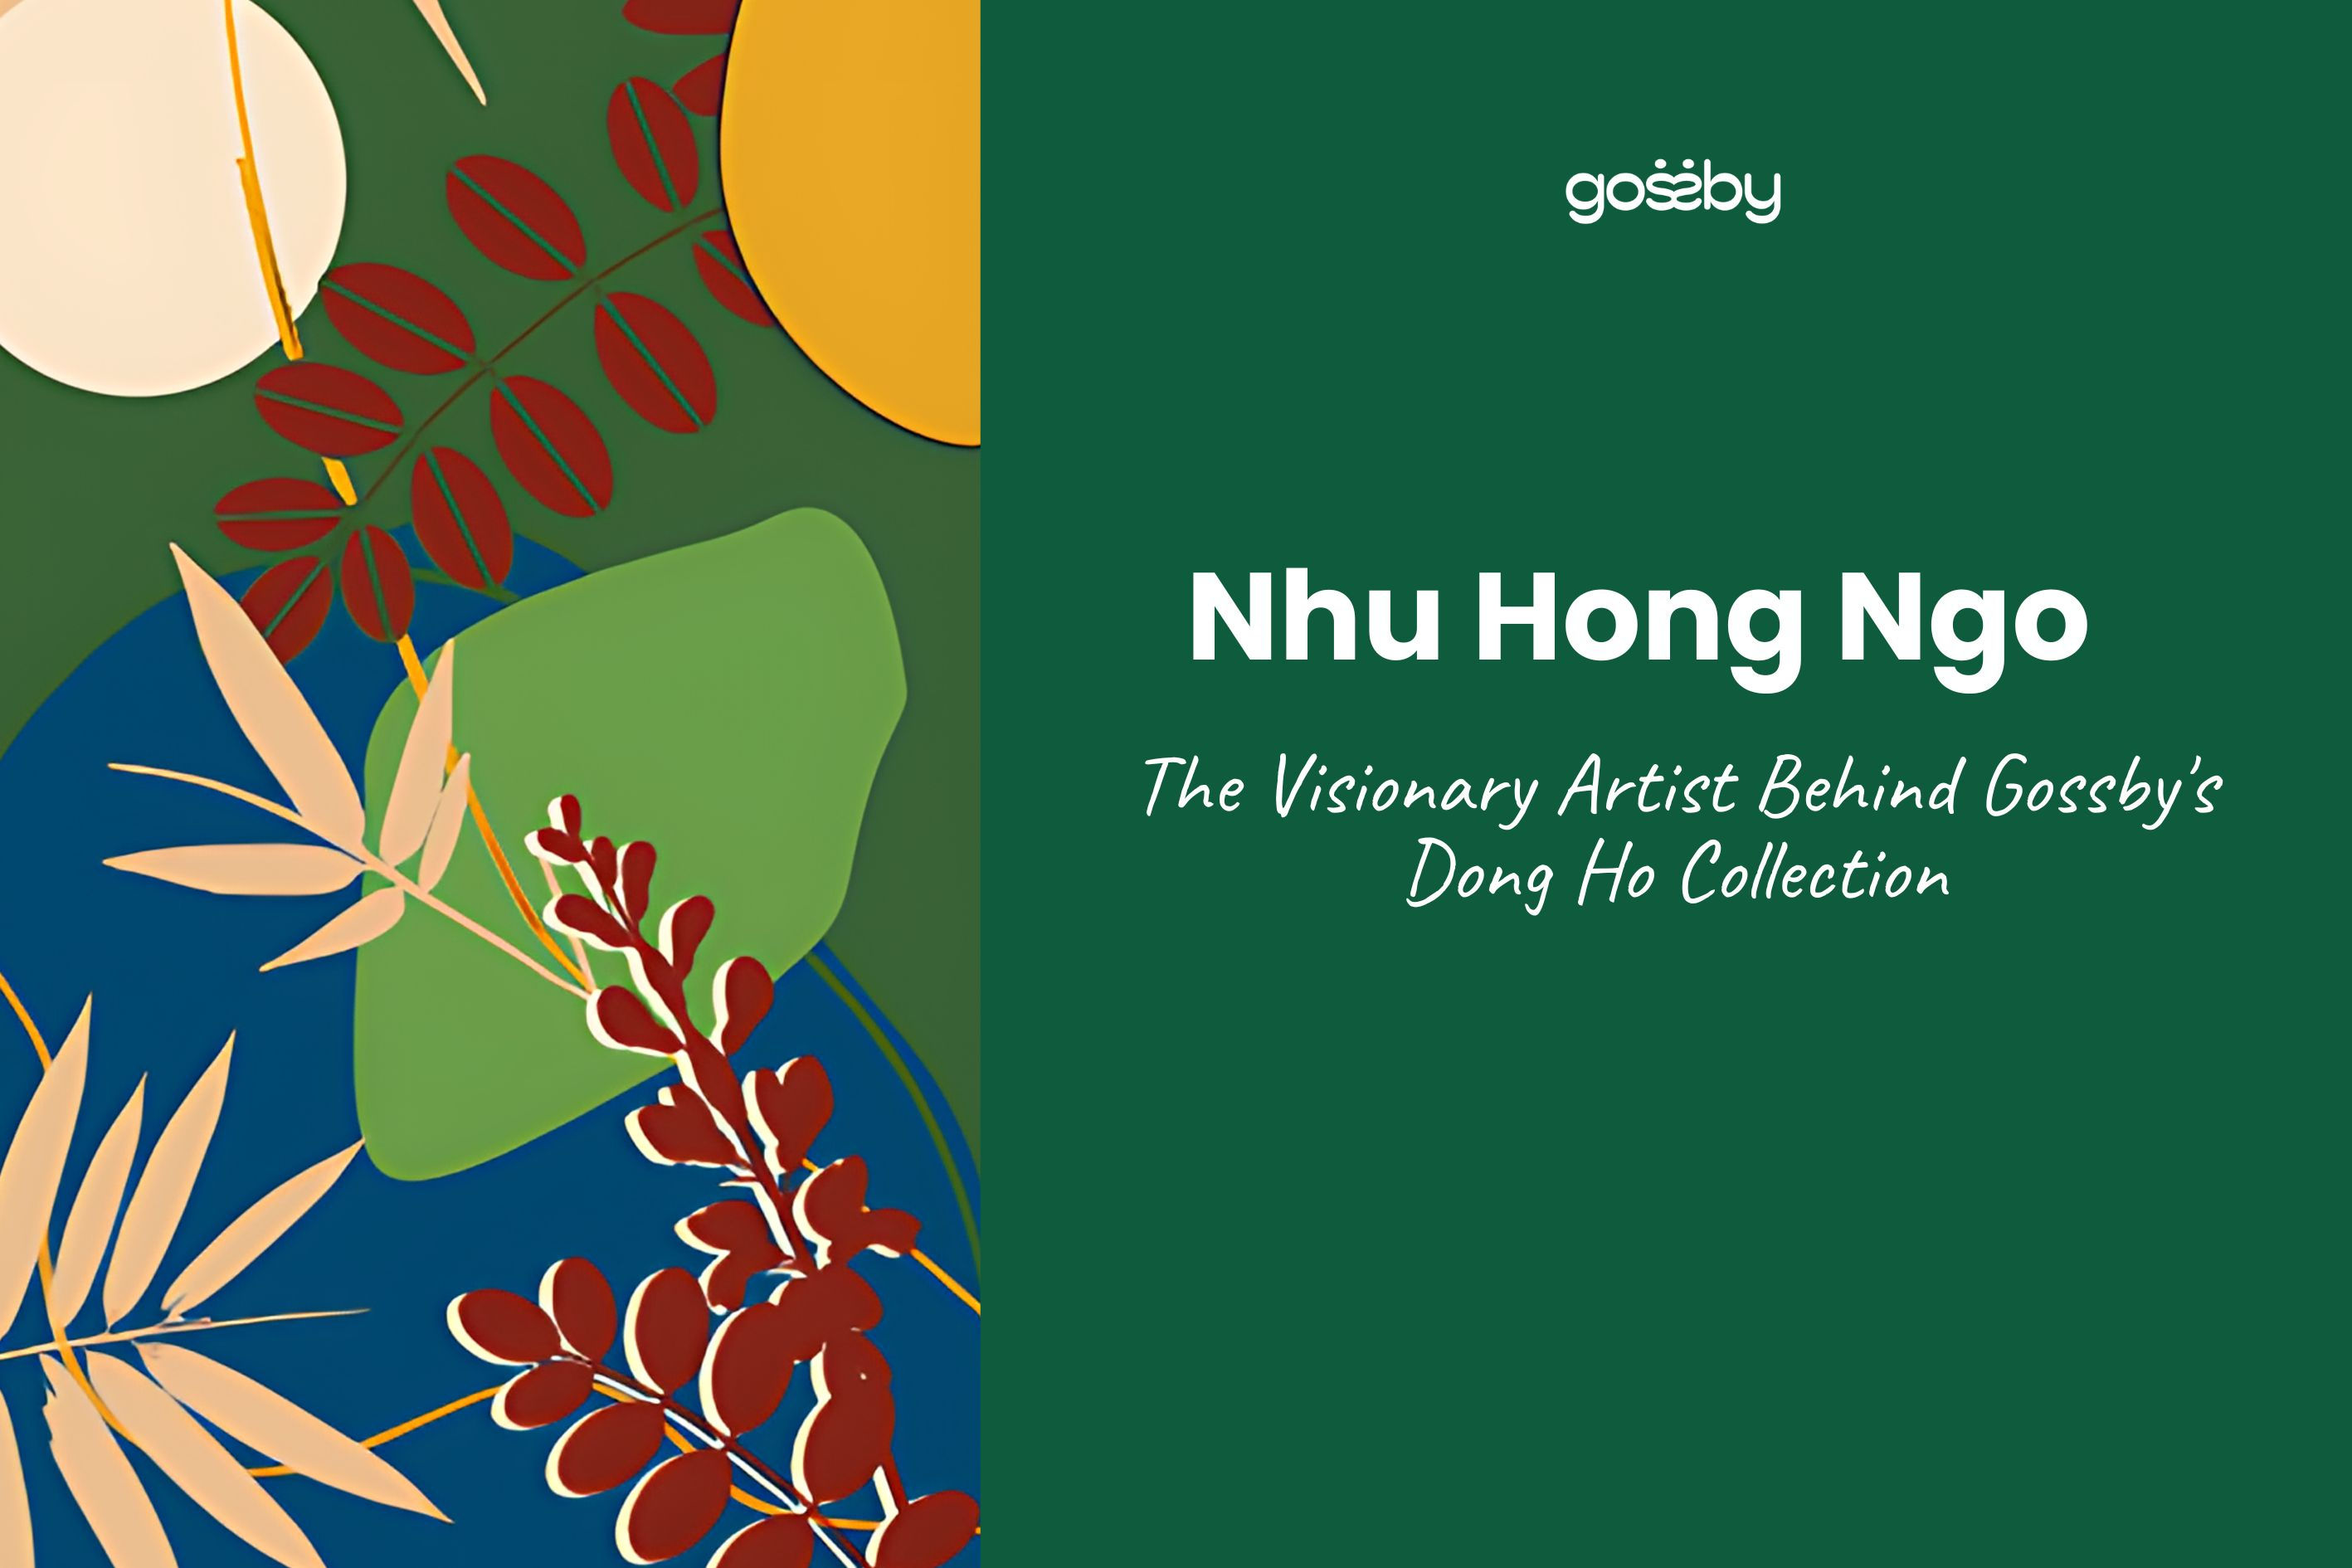 Nhu Hong: The Visionary Artist Behind Gossby's Dong Ho Collection